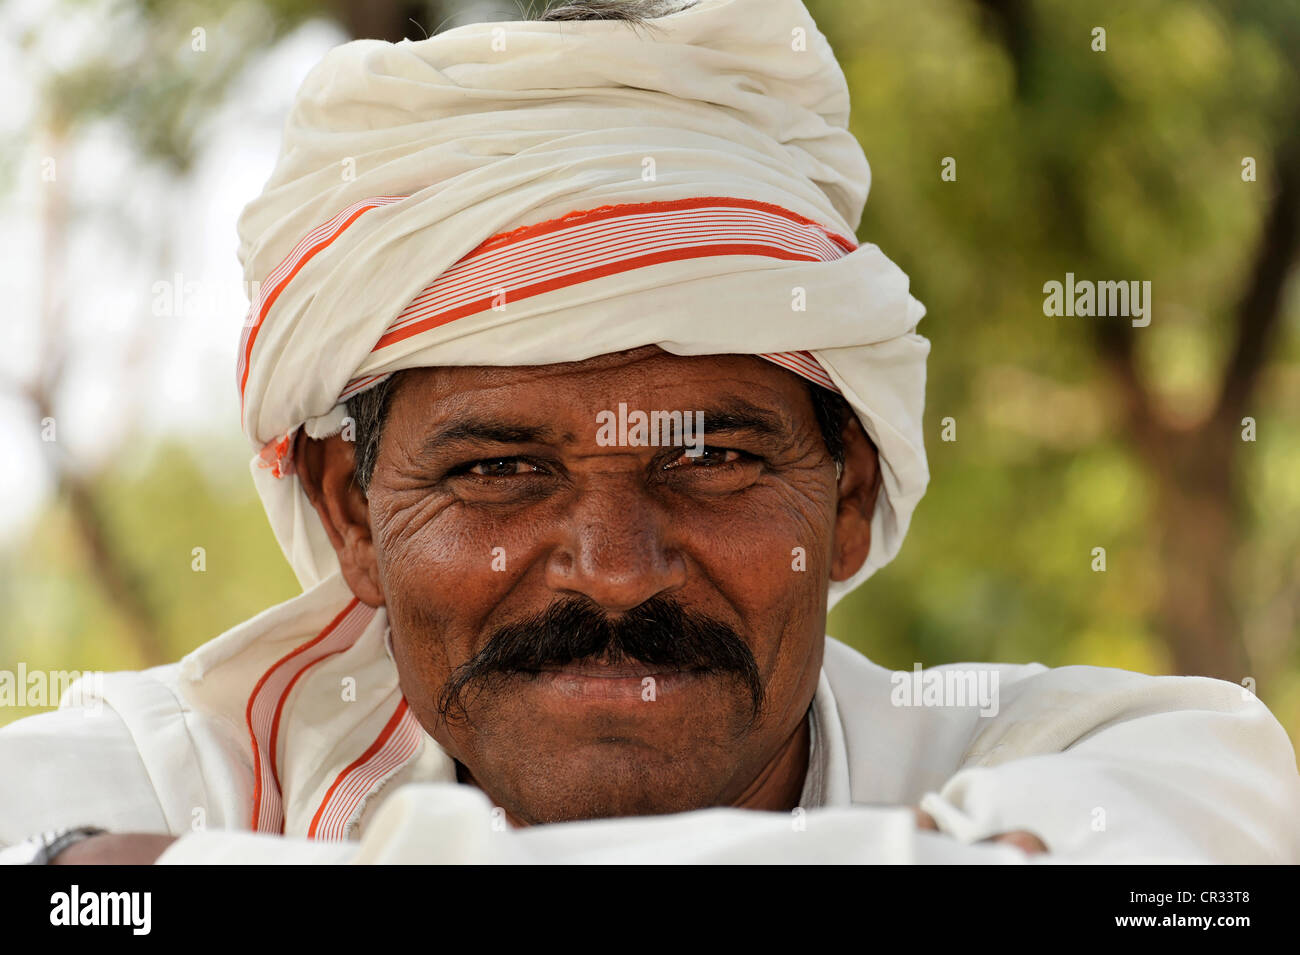 Uomo indiano, camel driver, ritratto, Kalakho, Rajasthan, Nord India, India, Asia del Sud, Asia Foto Stock